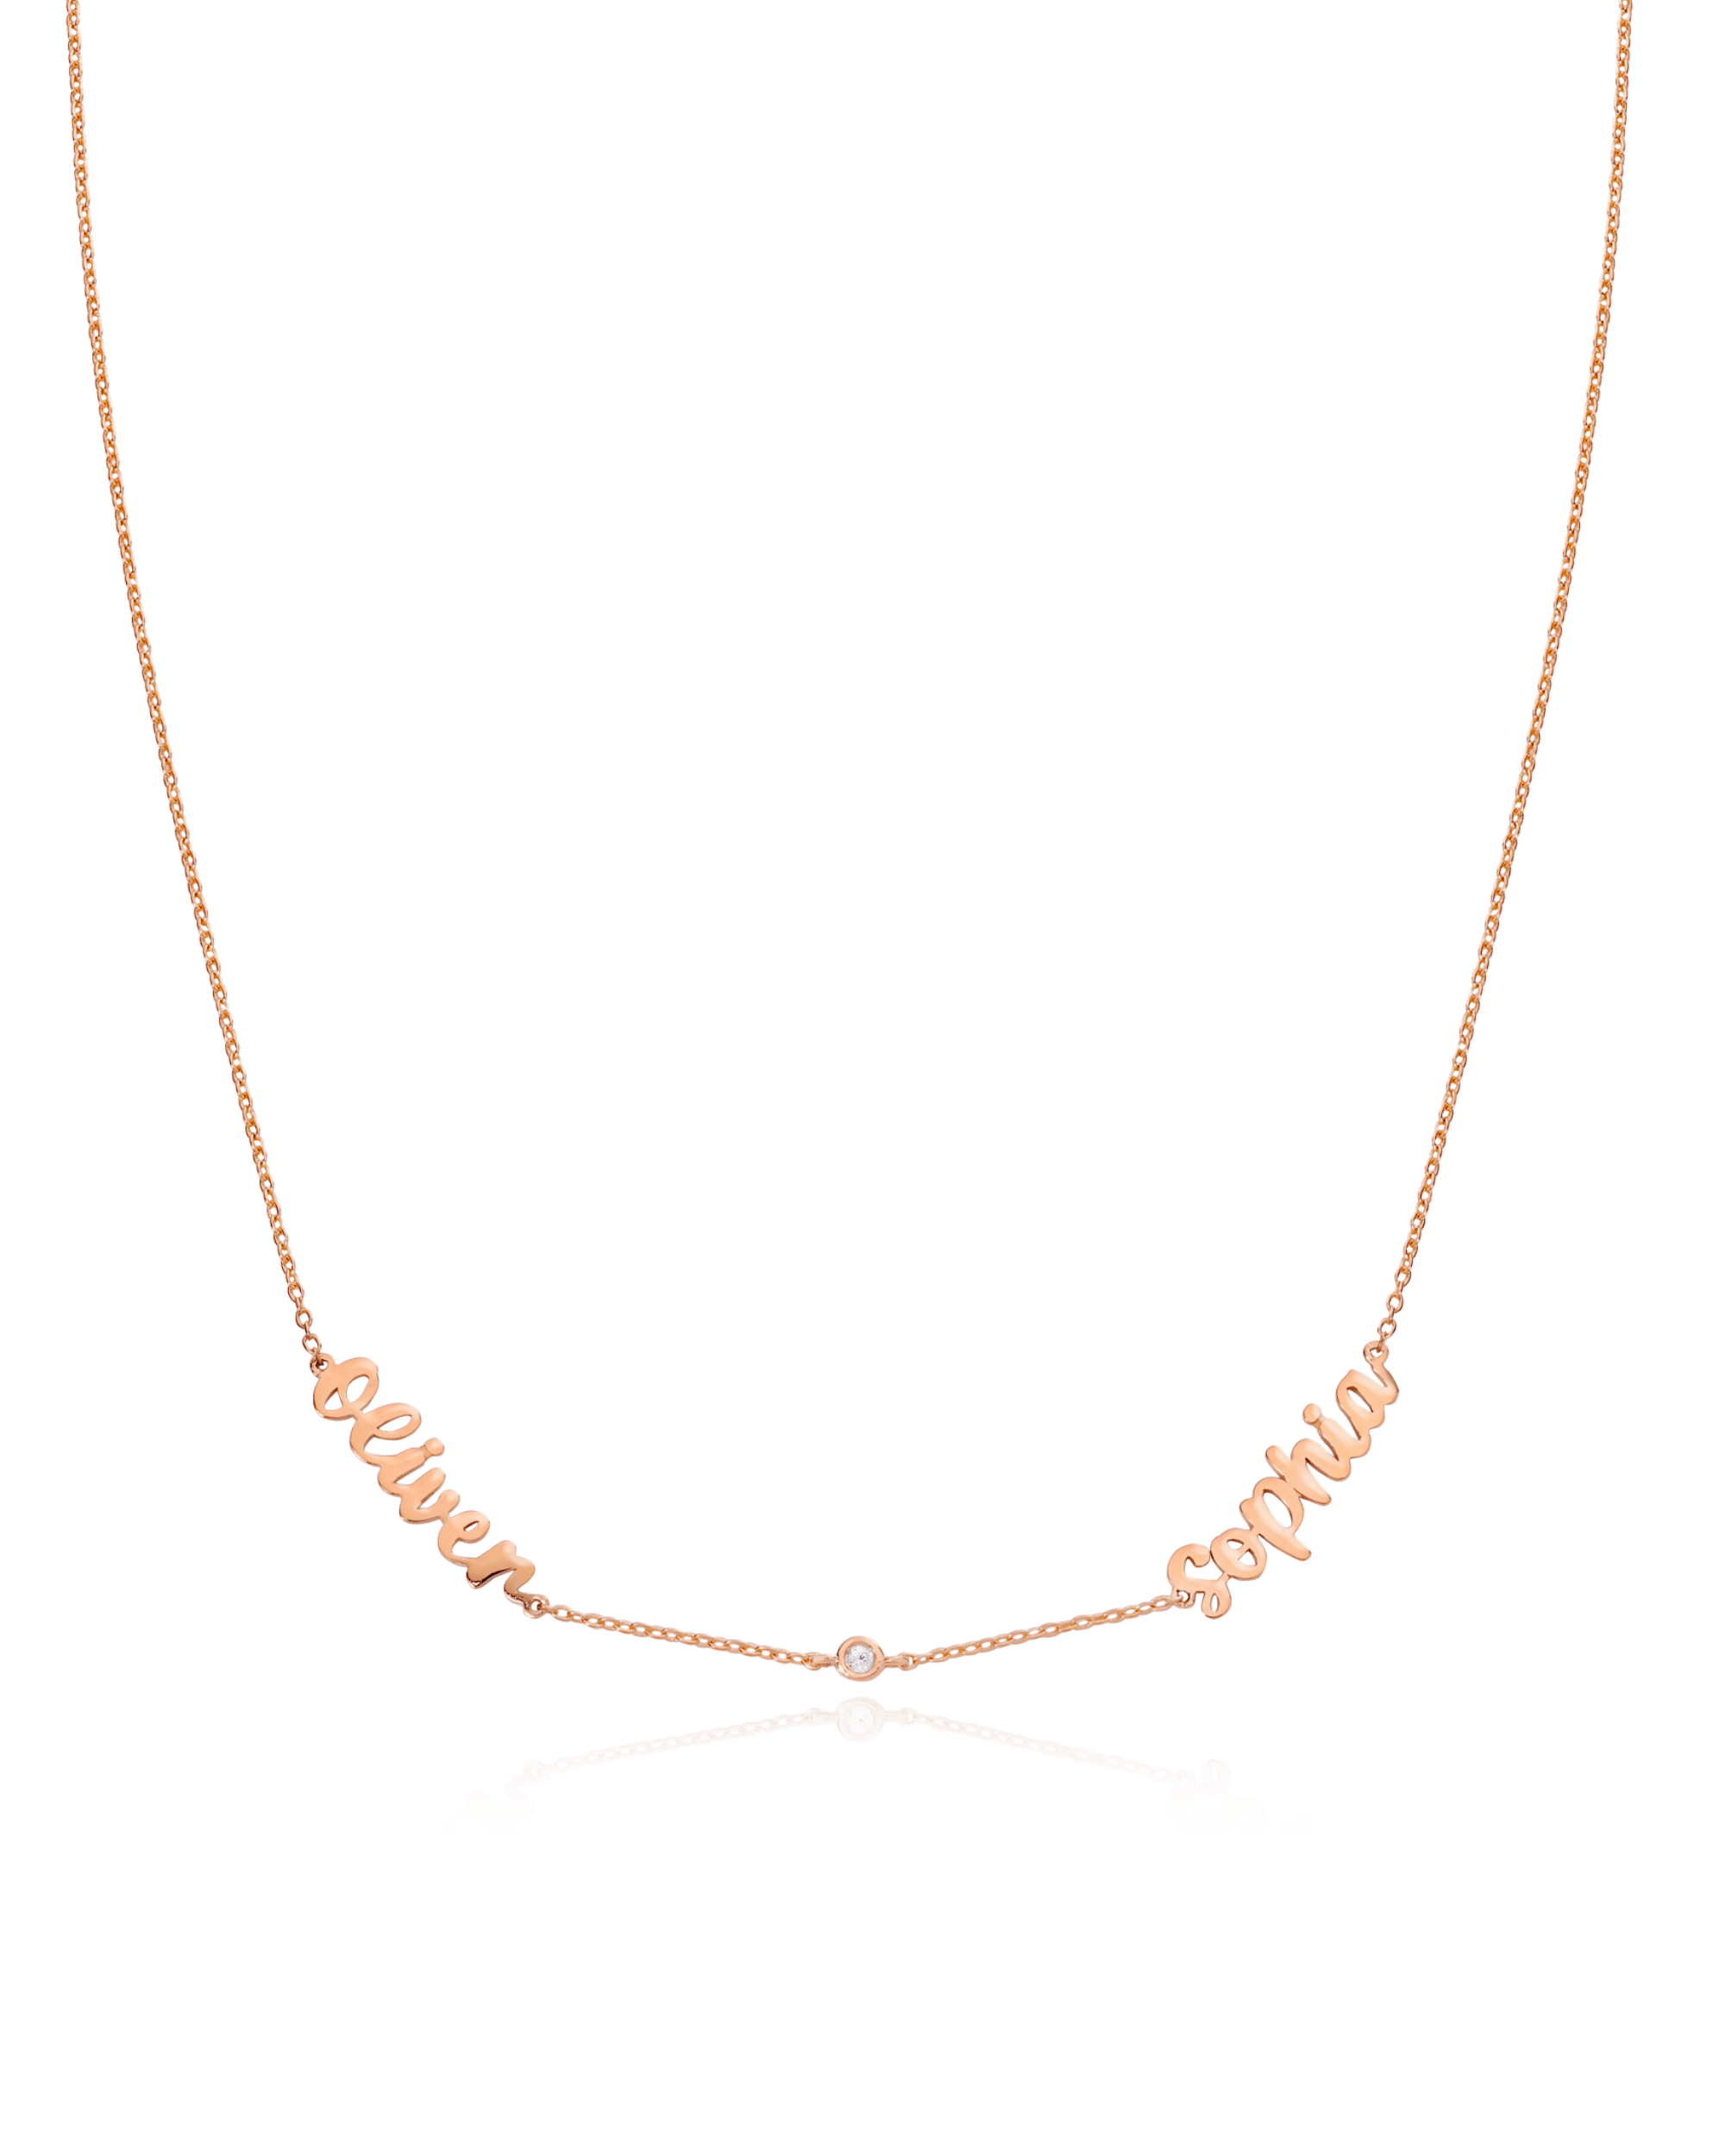 Name Necklace with Diamonds - 18K Gold Vermeil Necklaces magal-dev 